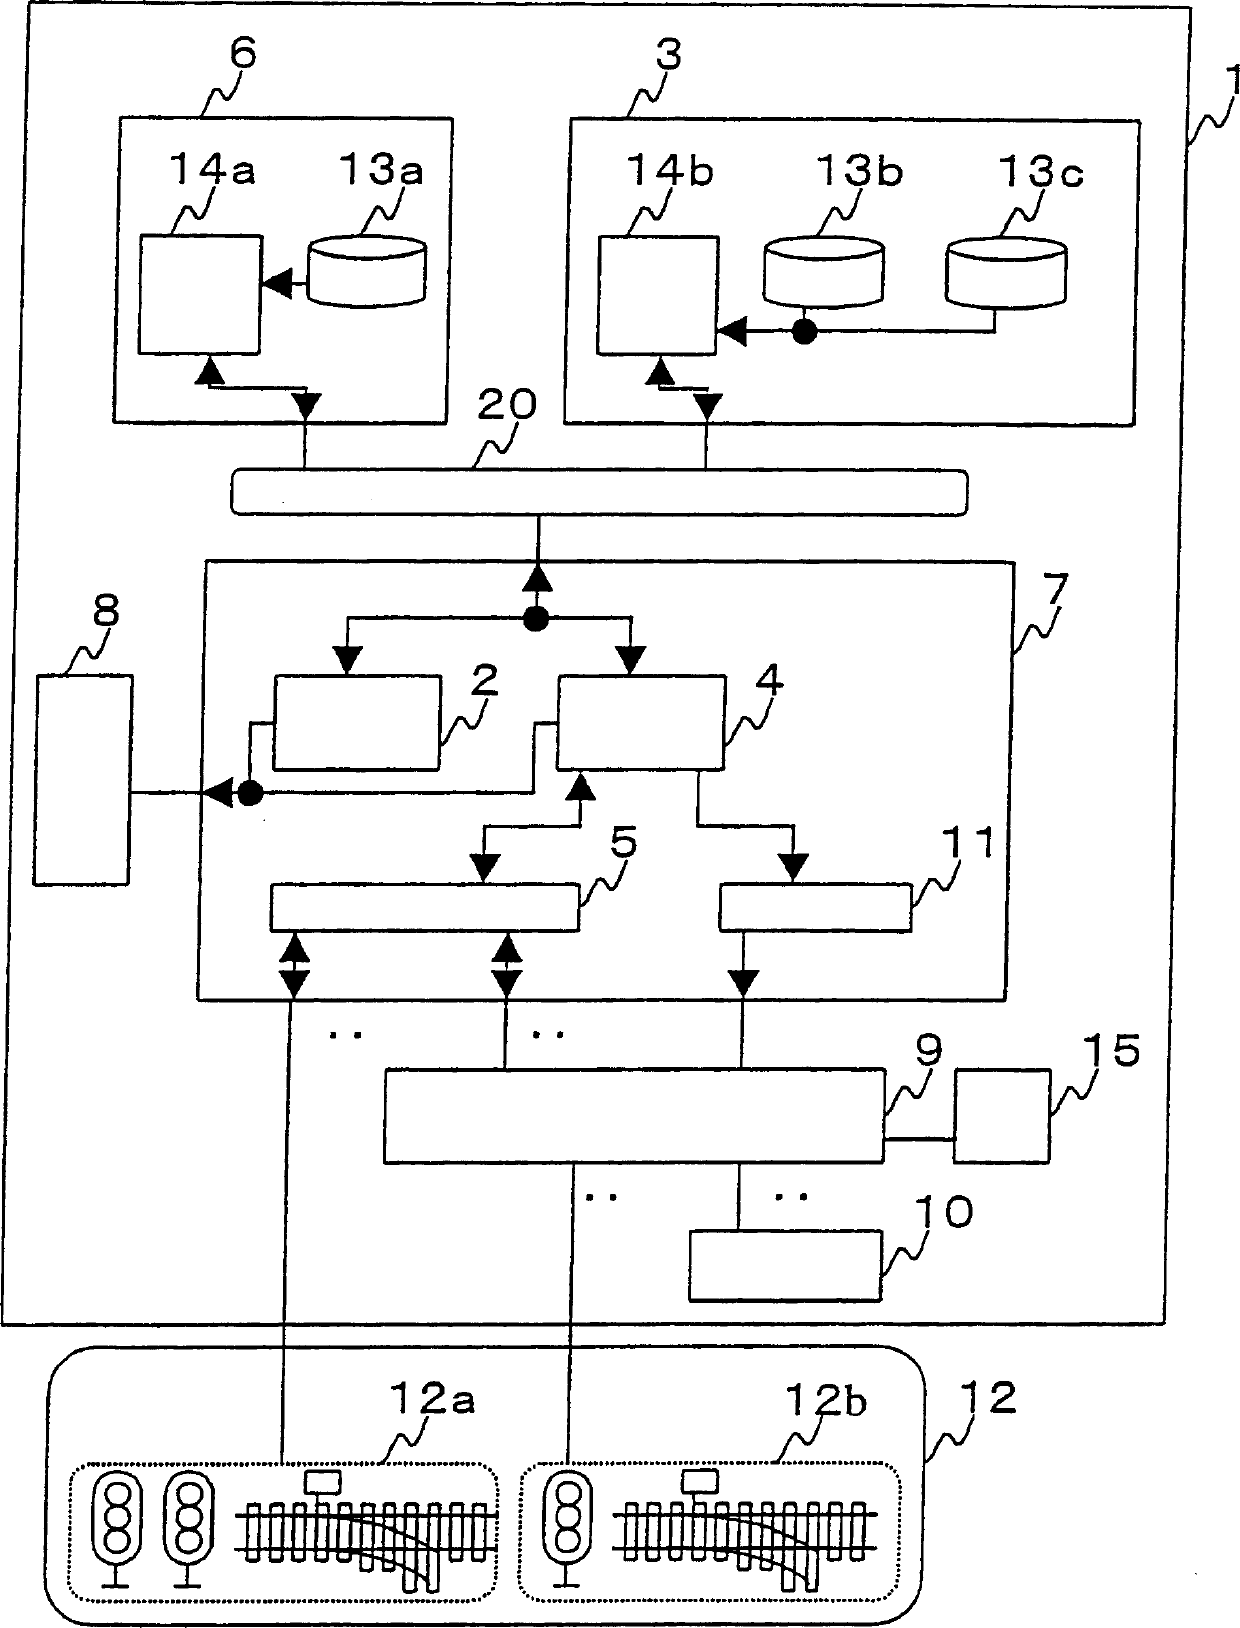 Testing apparatus and testing method for an electronic interlocking system